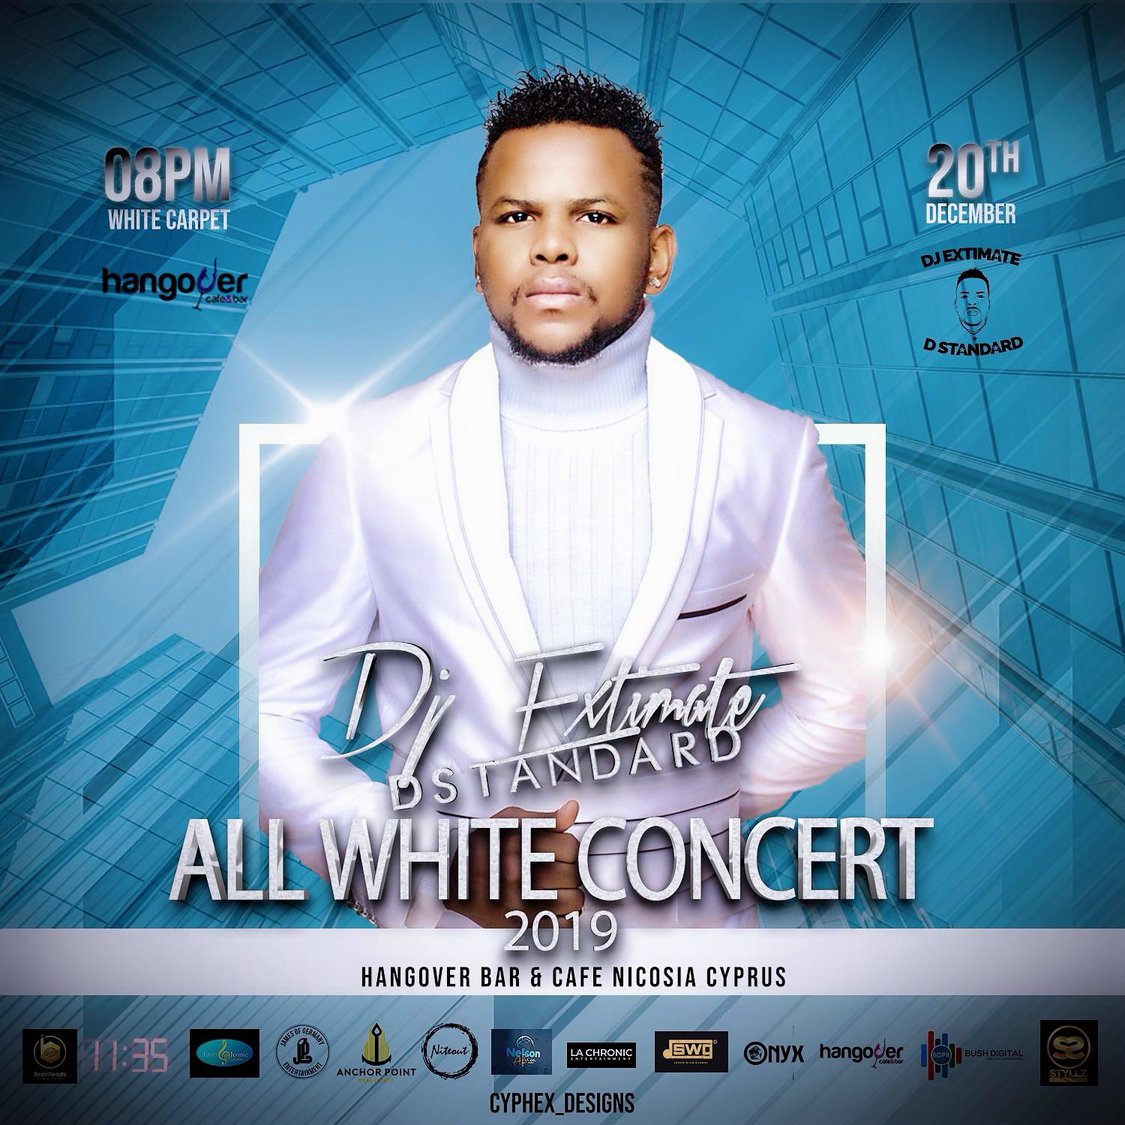 This December experience the biggest All White Concert from Award